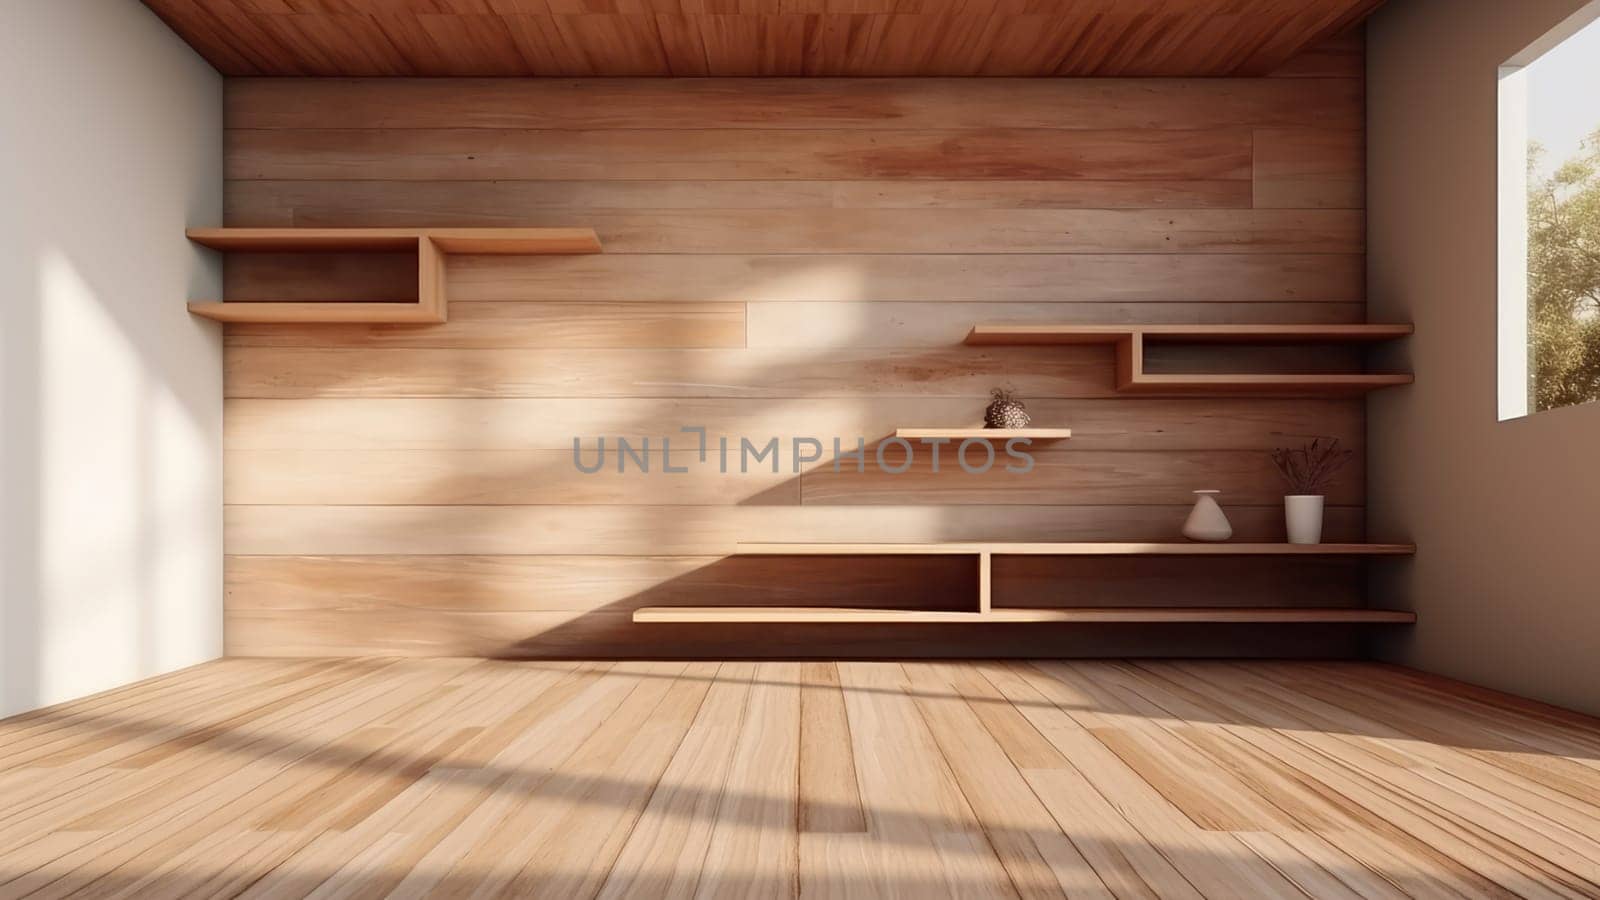 3D interior rendering of a built-in wooden shelving on a wooden wall. by Arissuu1